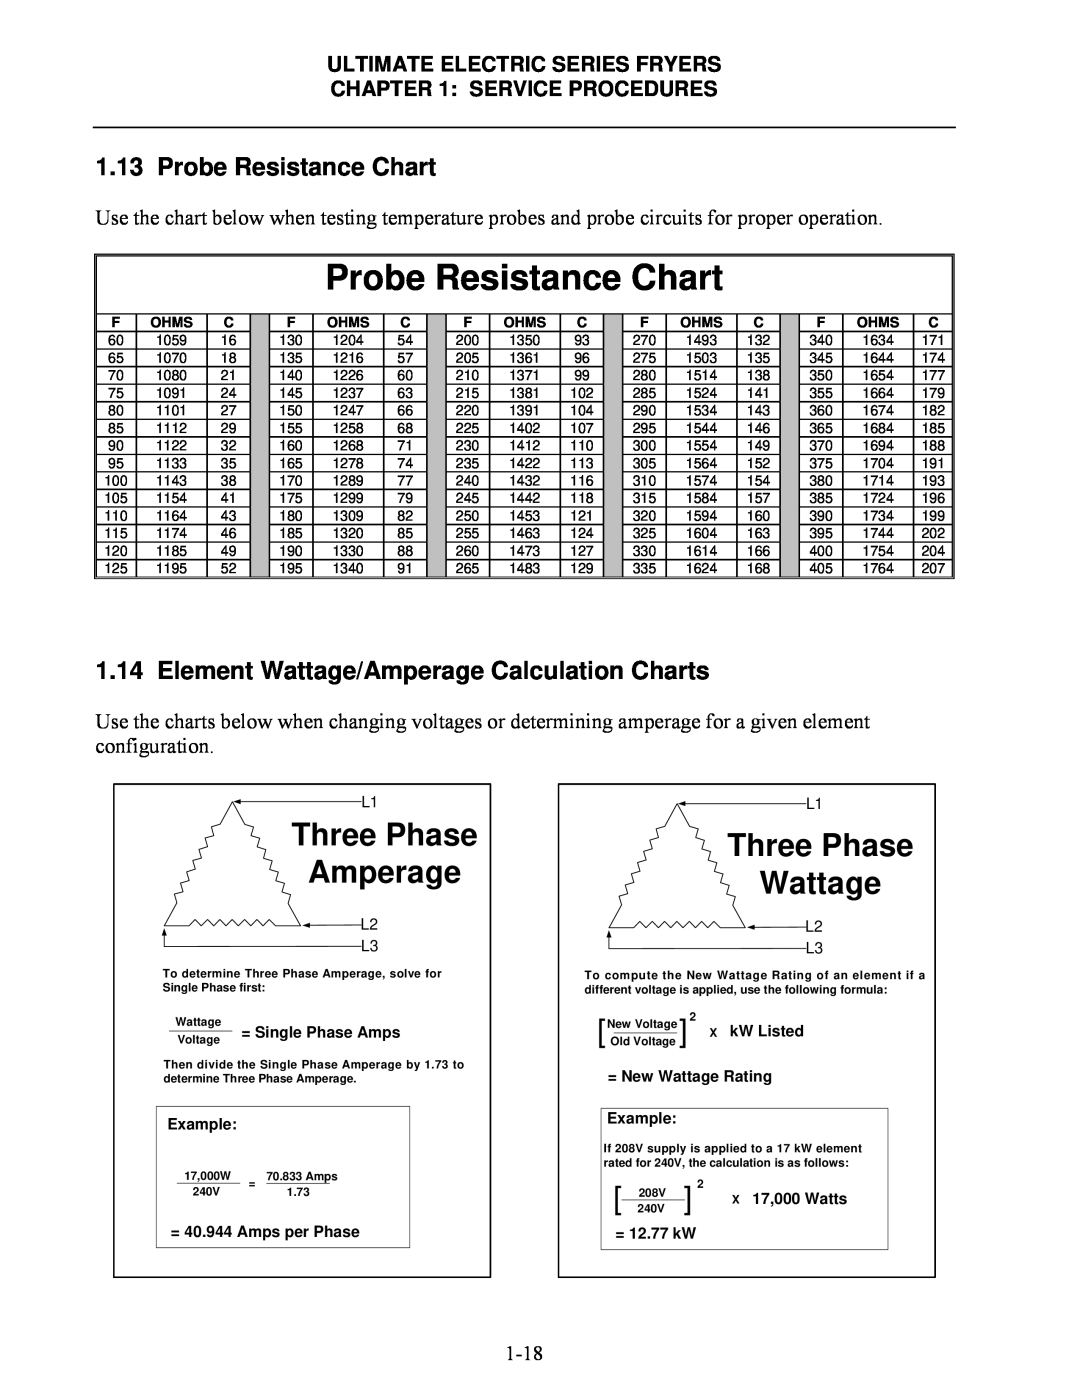 Frymaster Ultimate Electric Series Probe Resistance Chart, Element Wattage/Amperage Calculation Charts, Service Procedures 